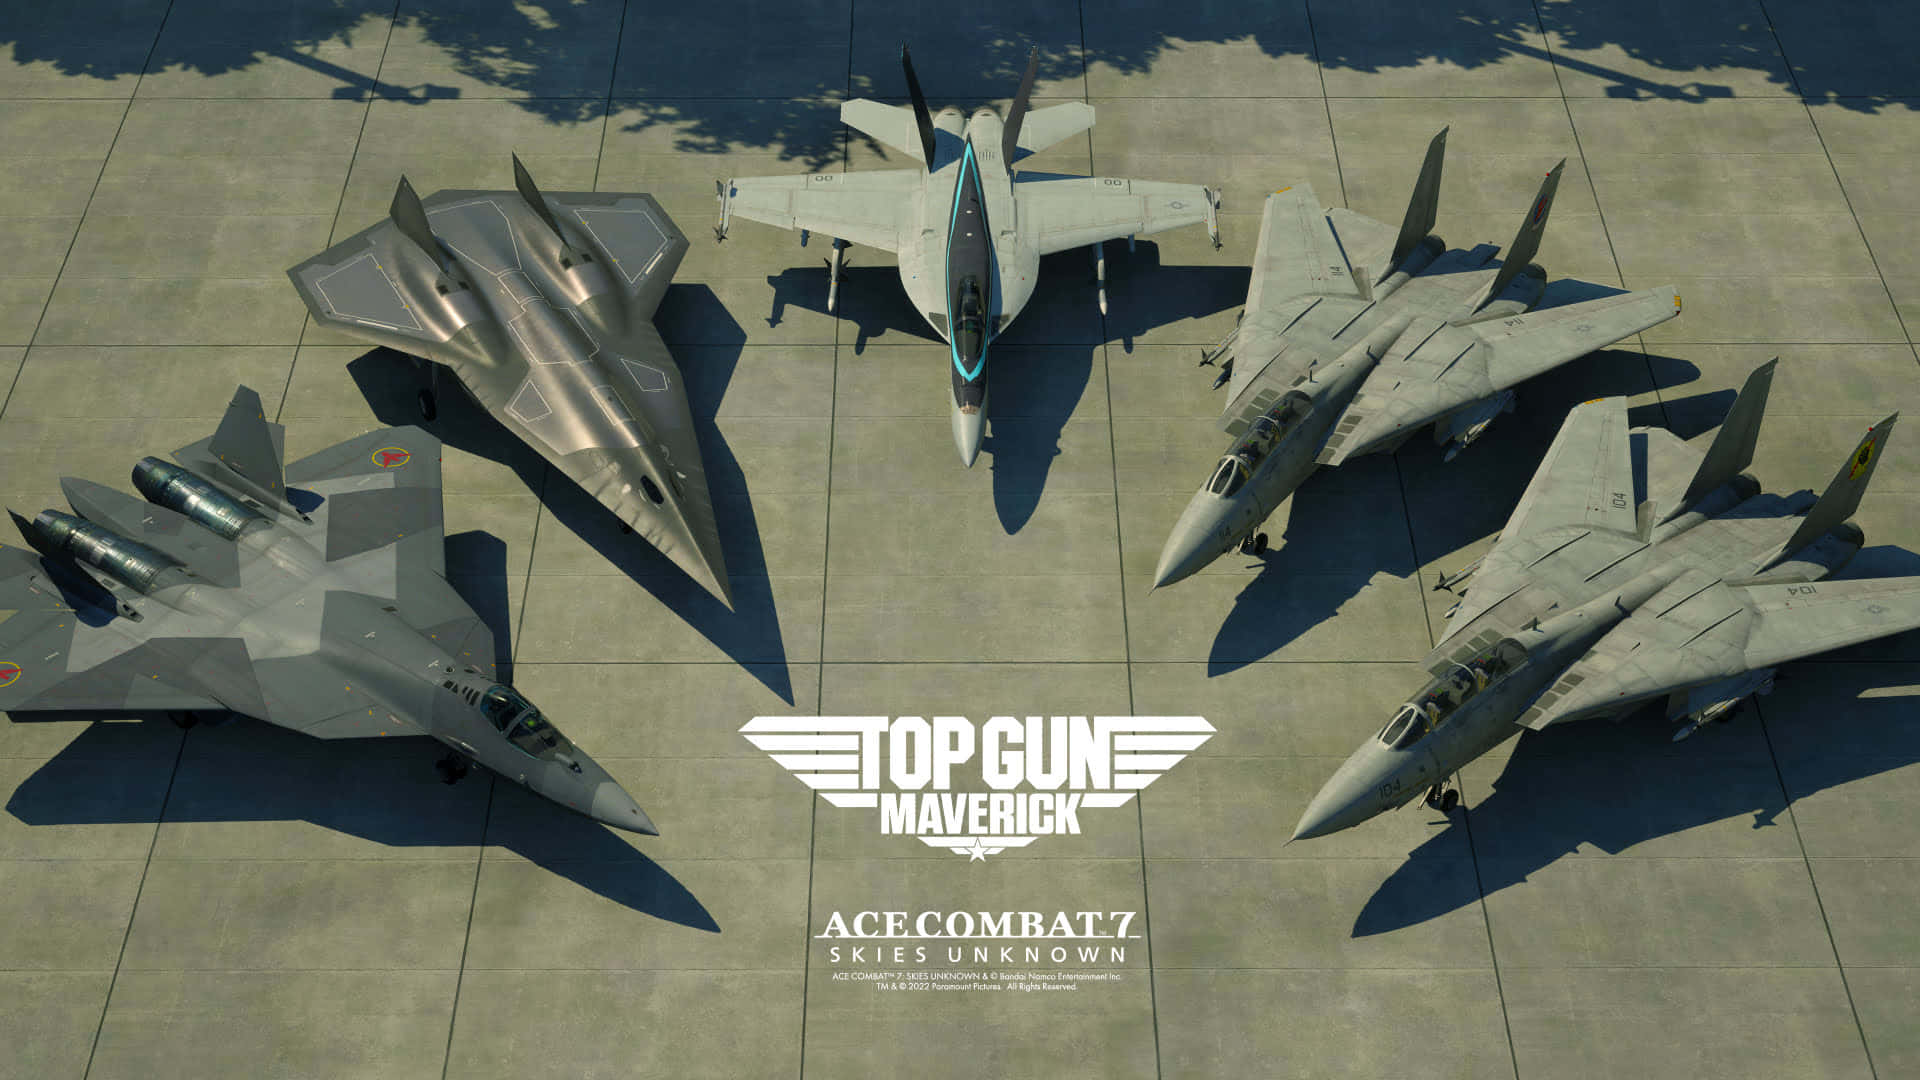 Be at the top of your game with Top Gun